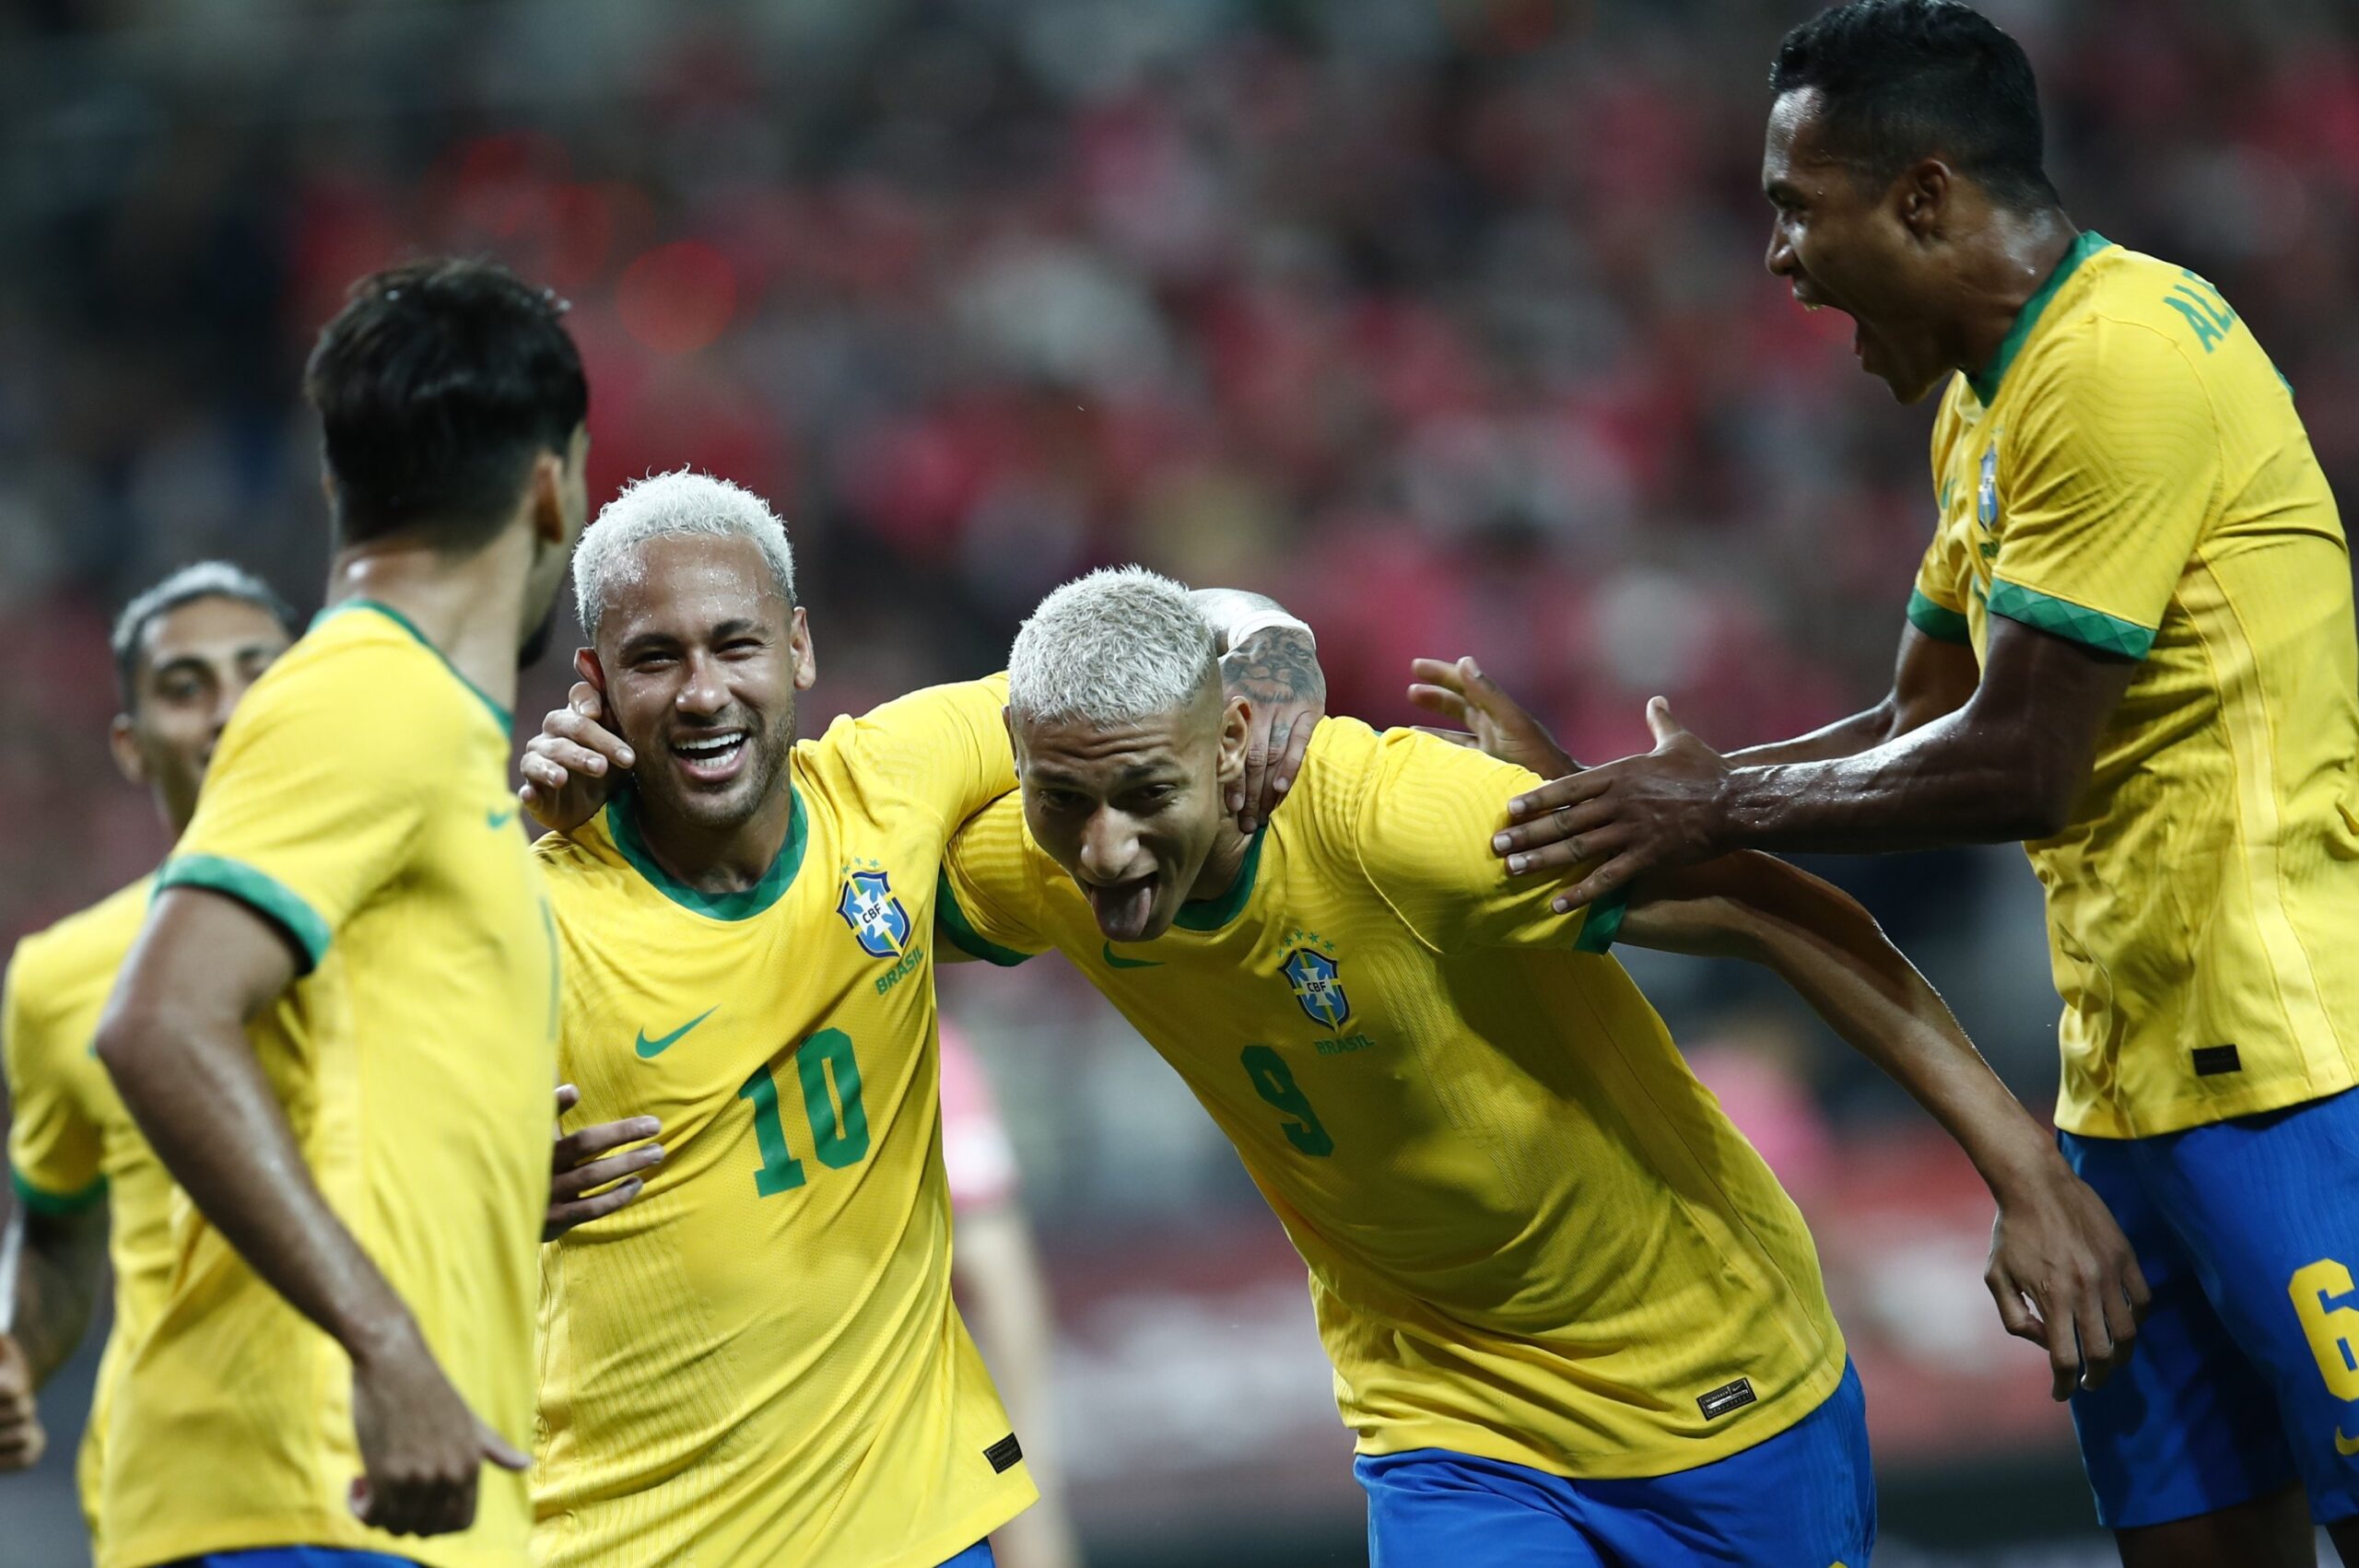 Neymar, Lucas Paqueta and Vinicius Junior were all in impressive form as Brazil dominated the hapless South Korea by a score of 4-1